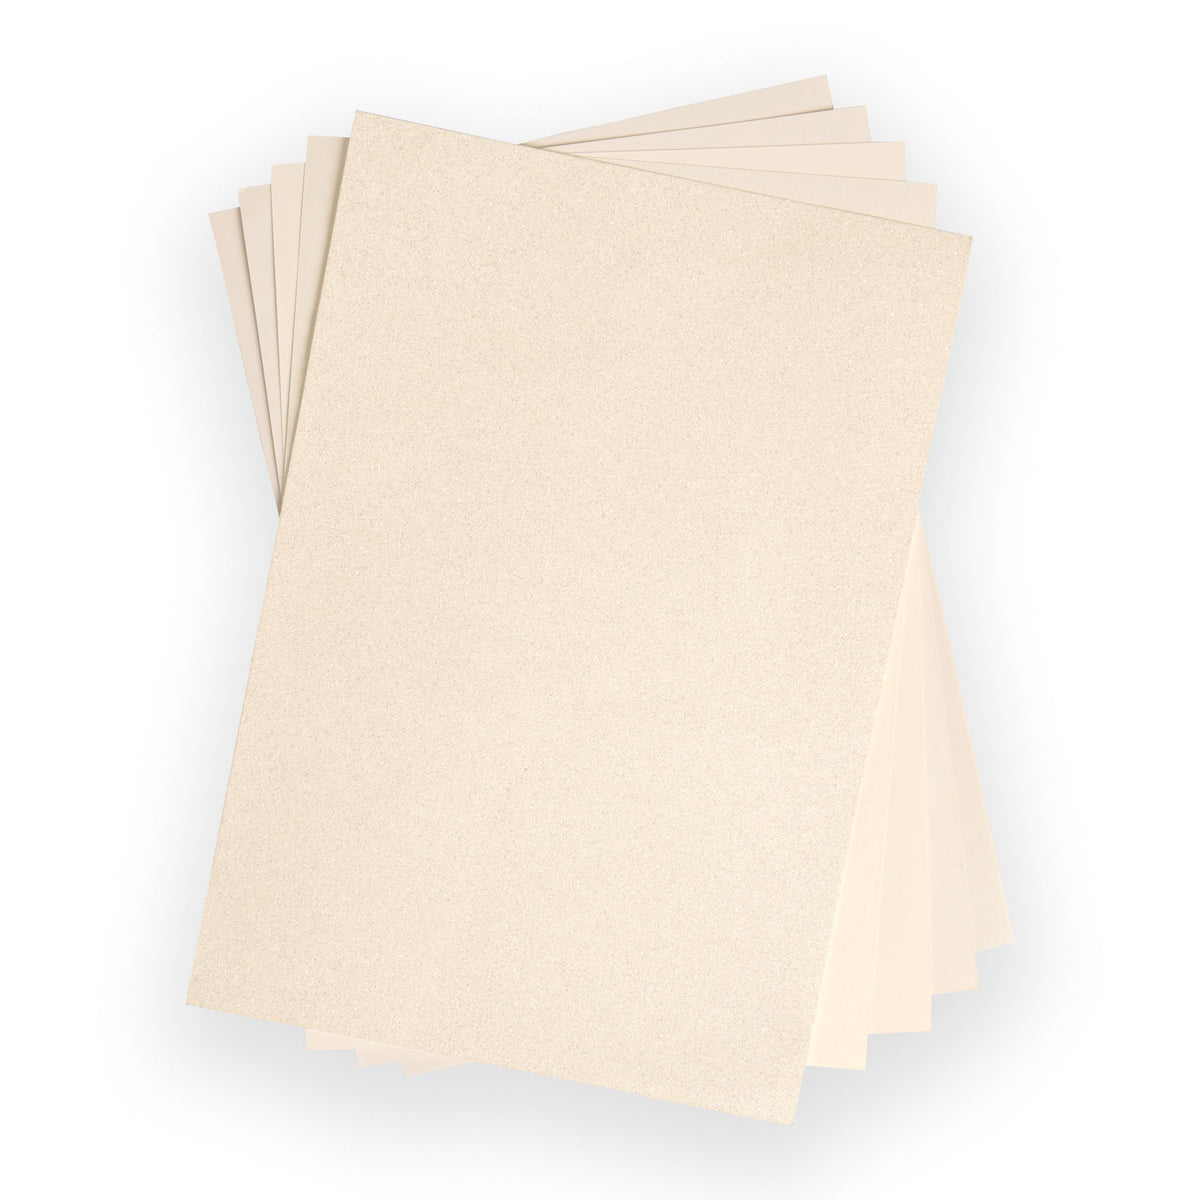 Sizzix Surfacez -The Opulent Cardstock Pack, Ivory, 50PK